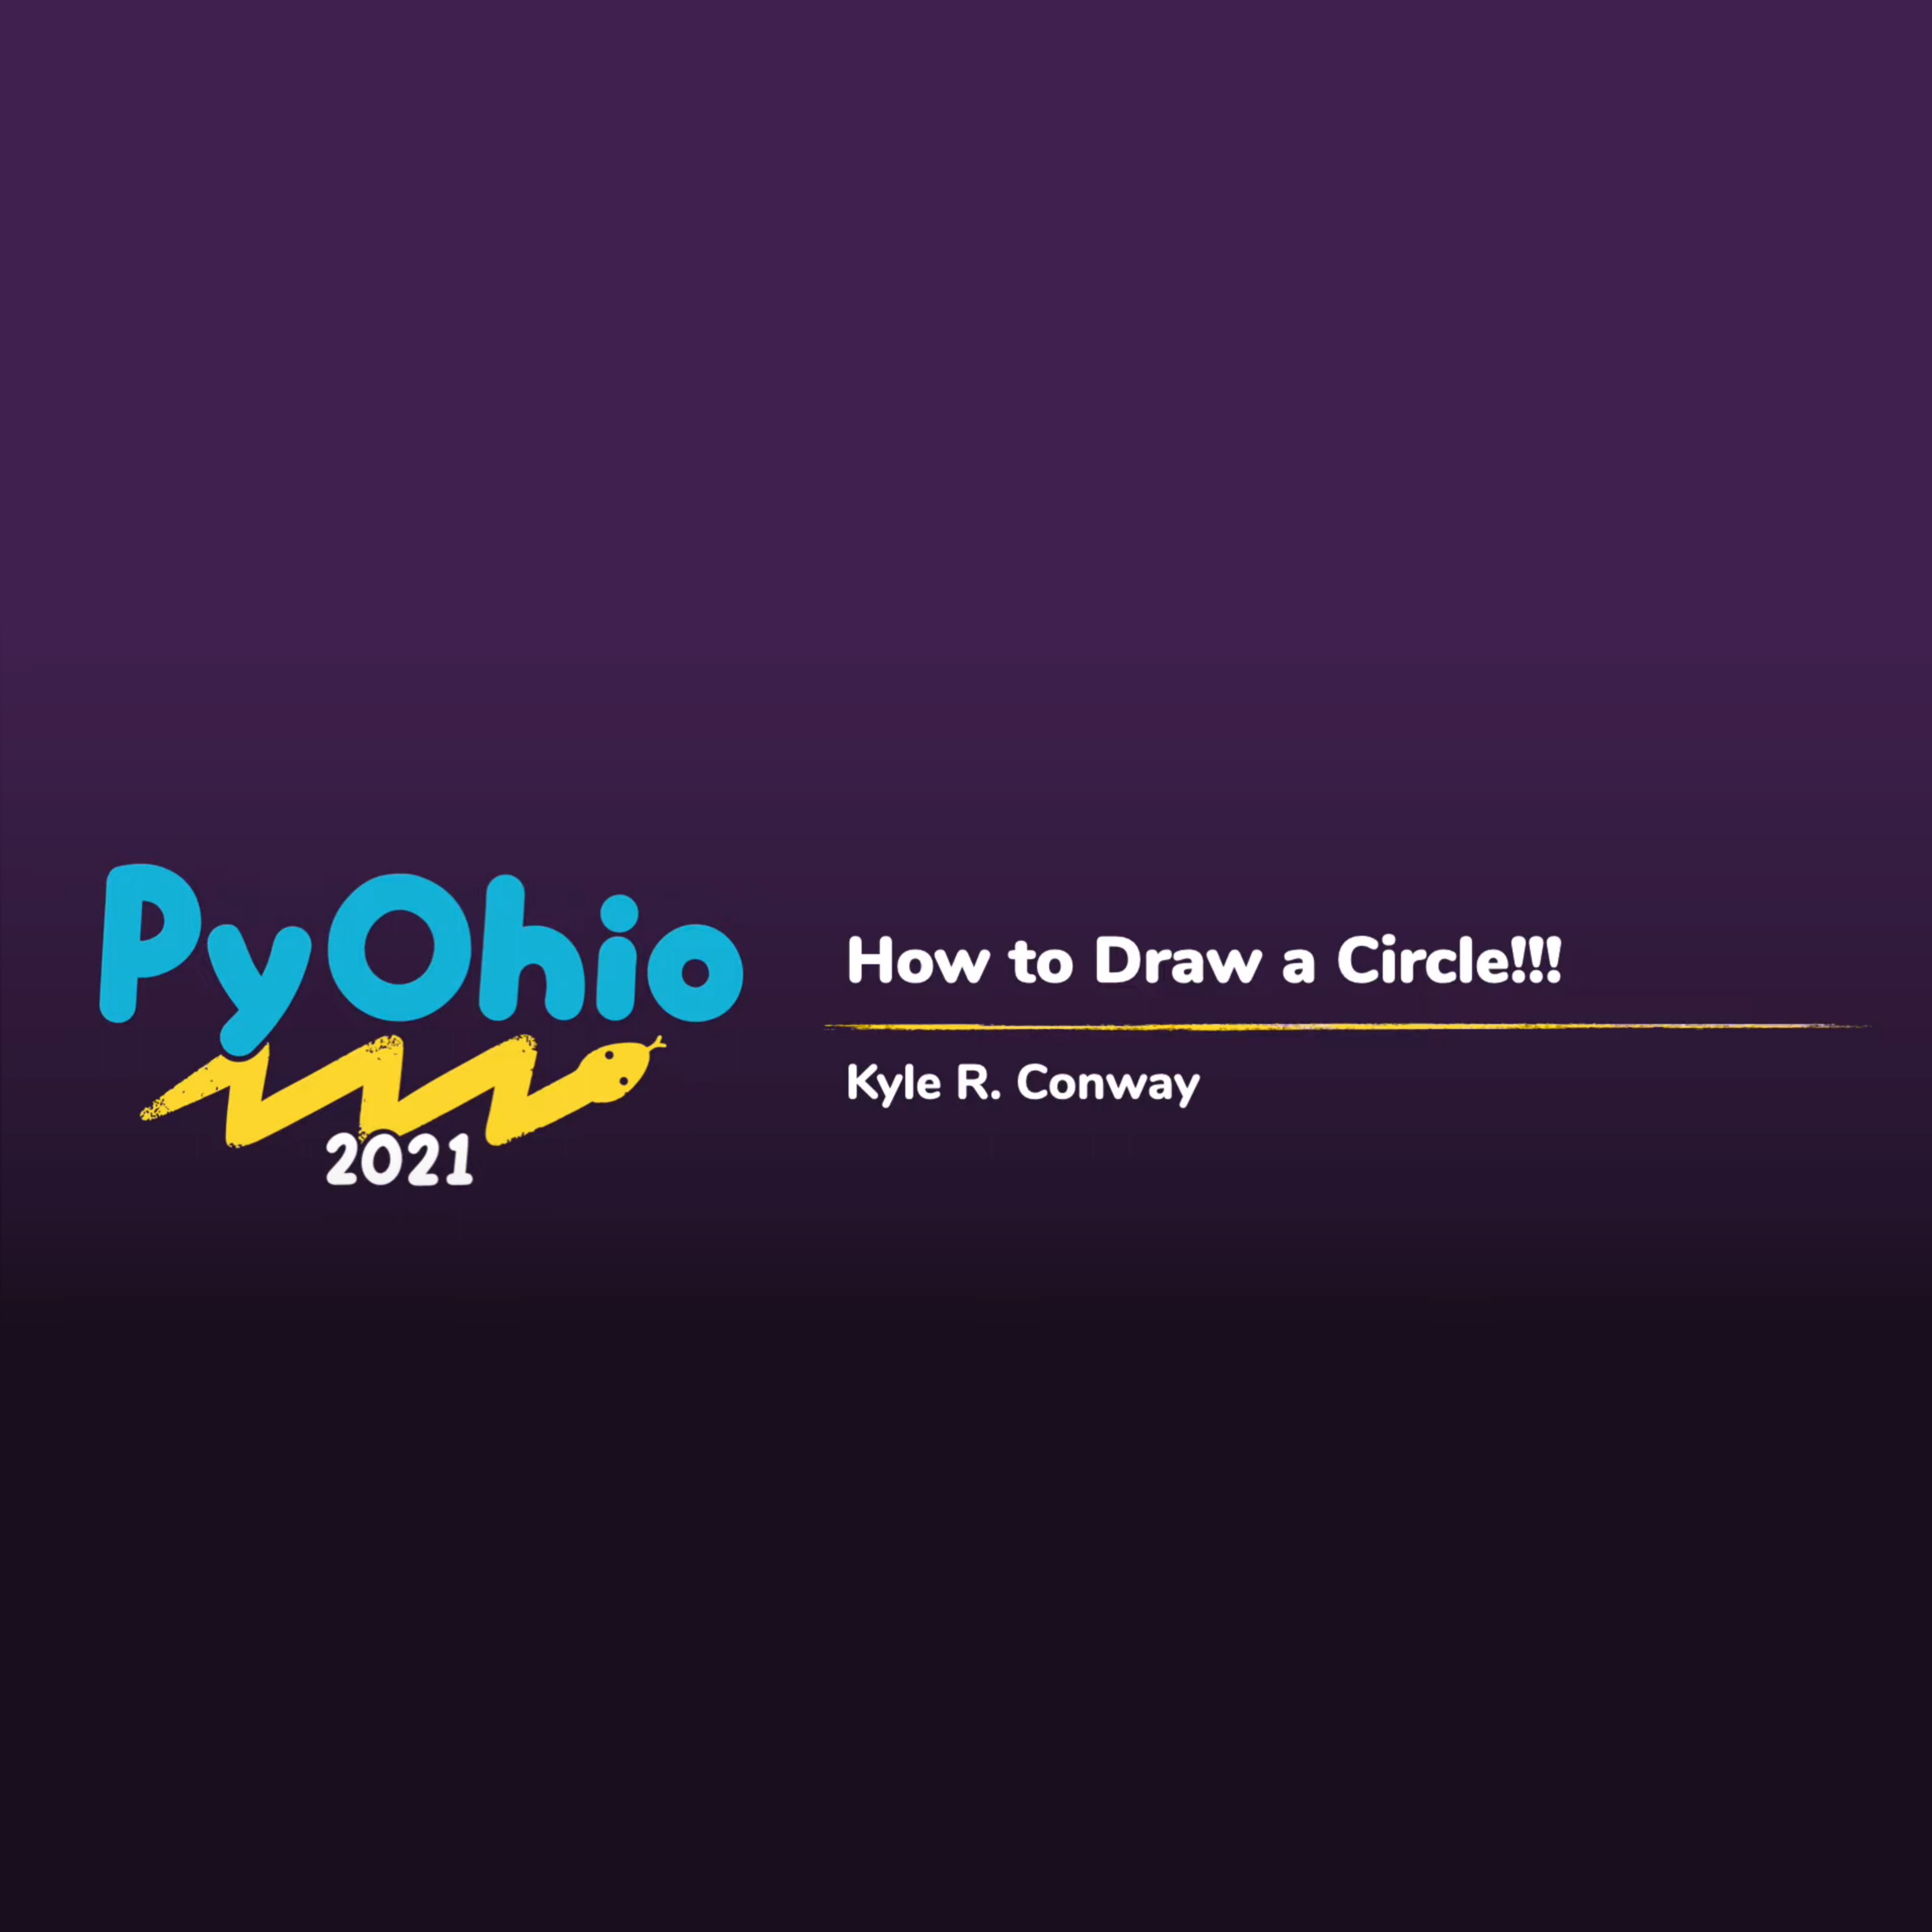 PyOhio 2021: How to Draw a Circle!!!